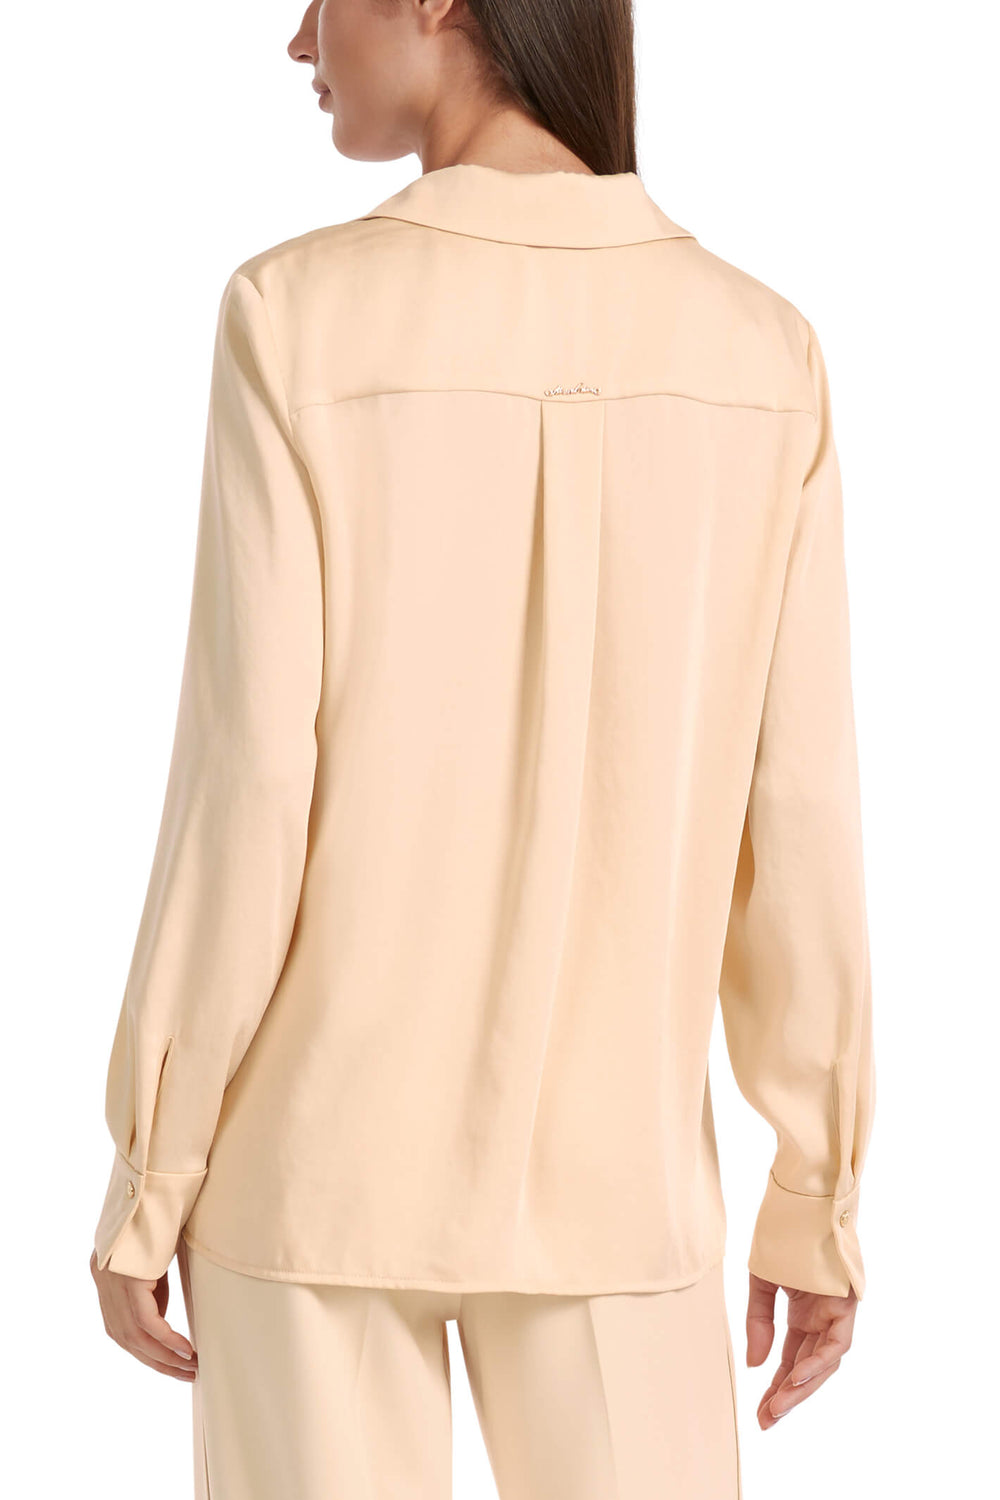 Marc Cain Collections VC 51.26 W08 132 Dark Cream Blouse - Olivia Grace Fashion